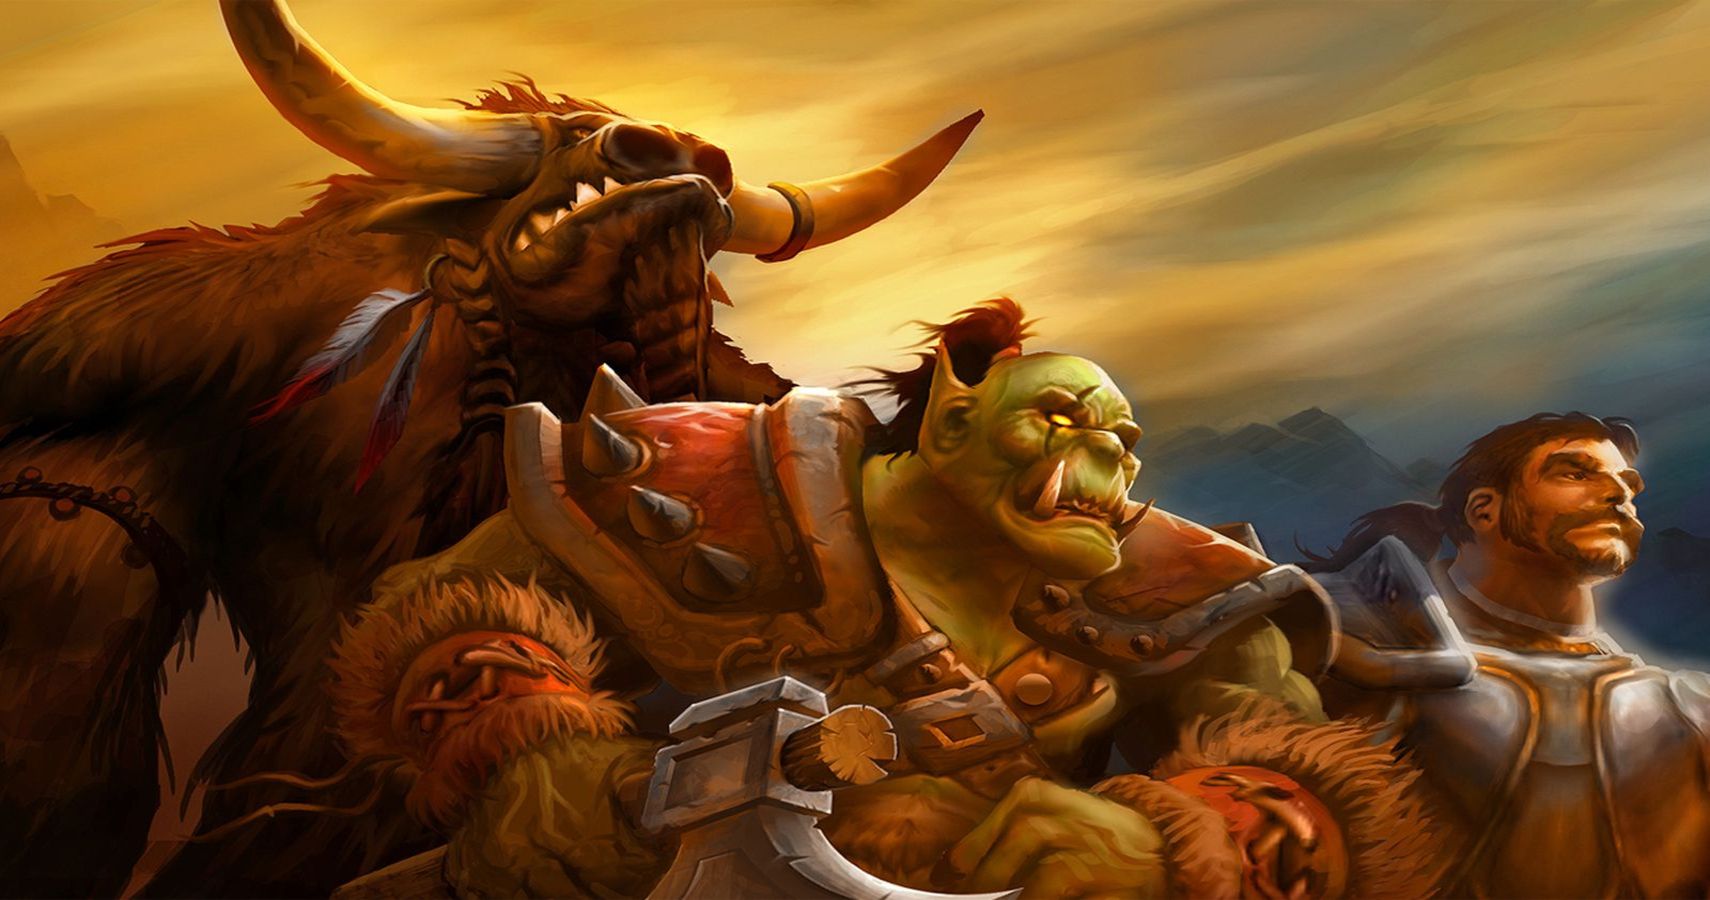 Ex-WoW Team Lead To Take Vanilla WoW Petition To Blizzard